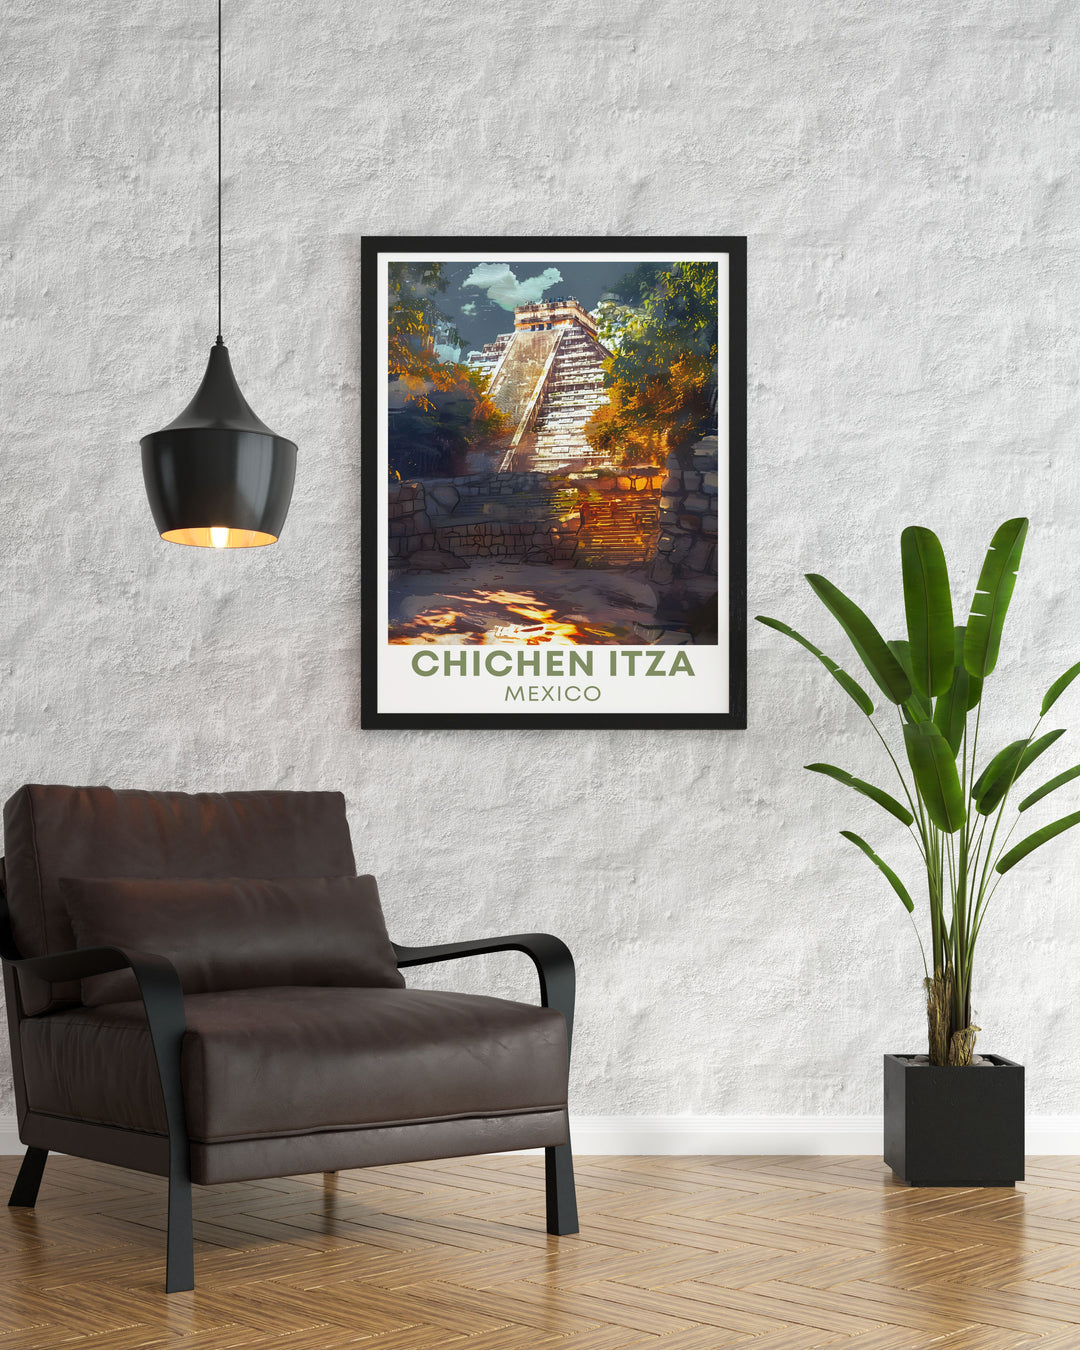 Bring the ancient wonders of Chichen Itza into your home with this stunning wall art. Perfect for those who appreciate Mexico City travel prints and Chichen Itzas rich history. A great piece for home decor or as a thoughtful gift.